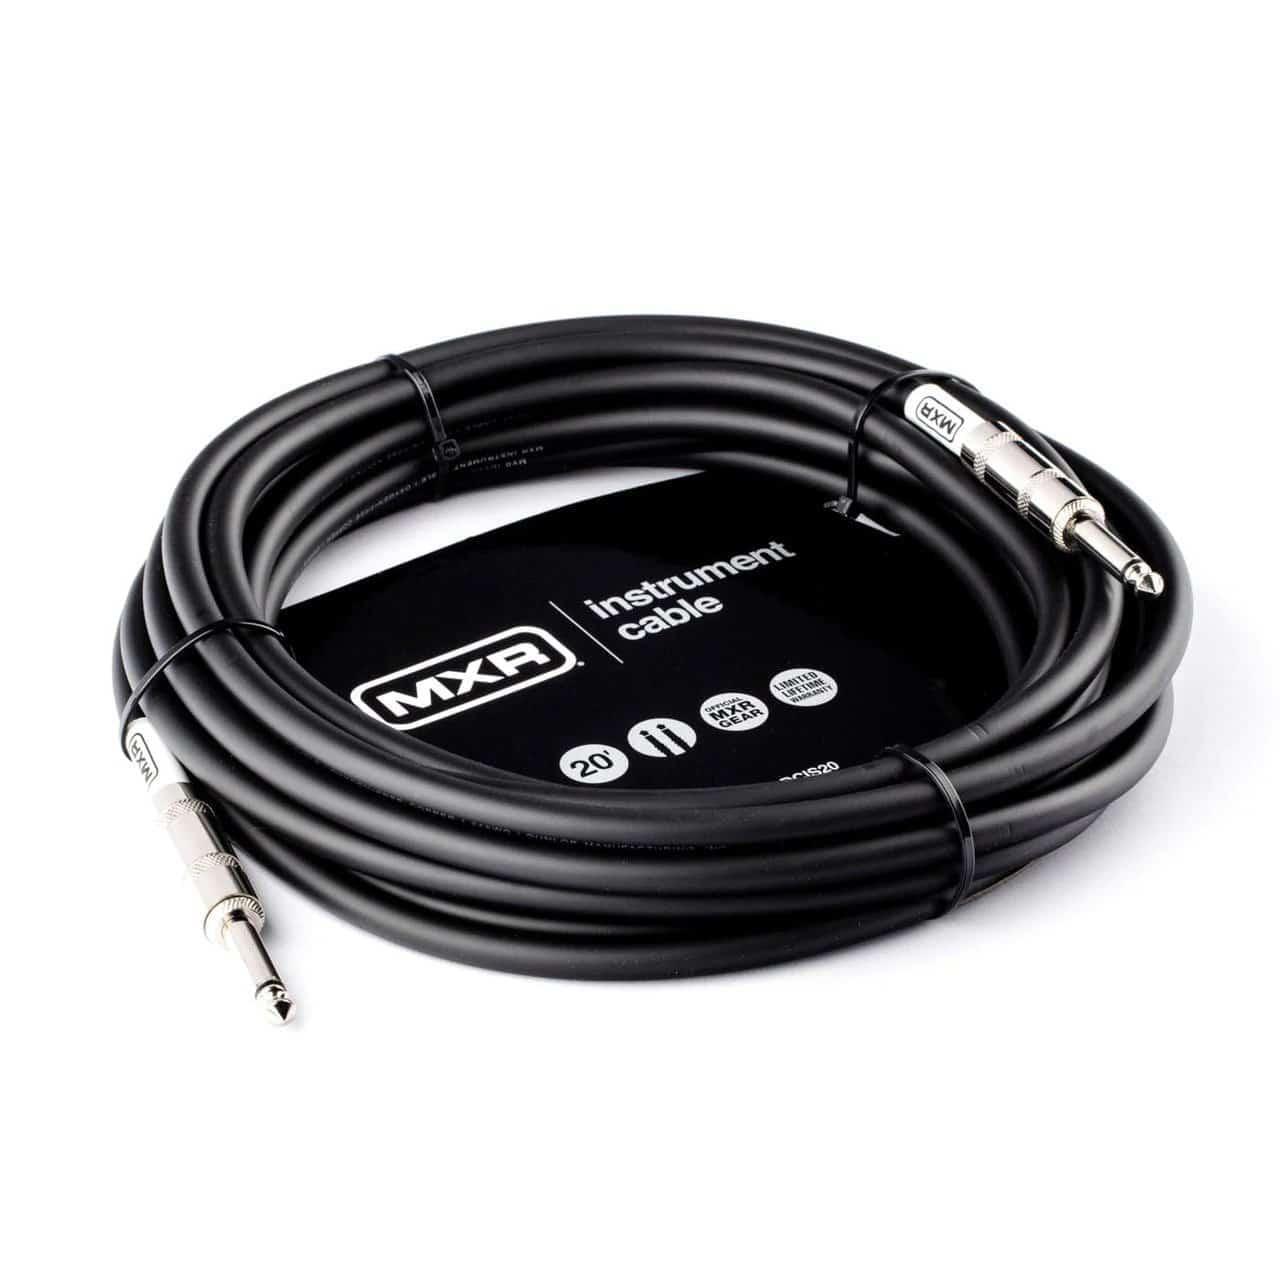 20 Ft Instrument Cable - Accessories - Cables & Adaptors by MXR at Muso's Stuff